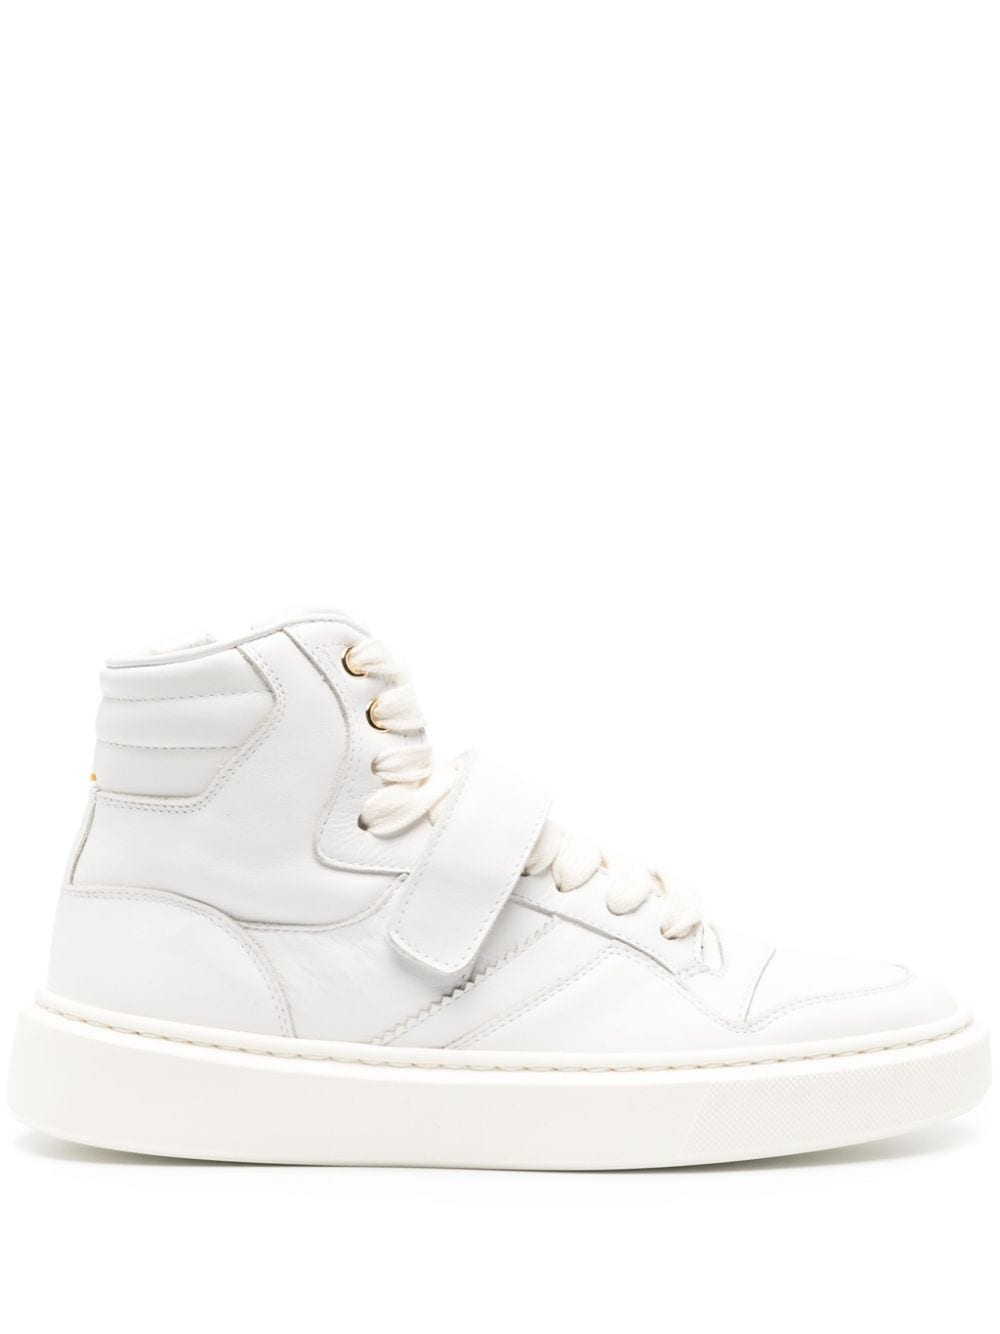 Doucal's hi-top leather sneakers - White von Doucal's